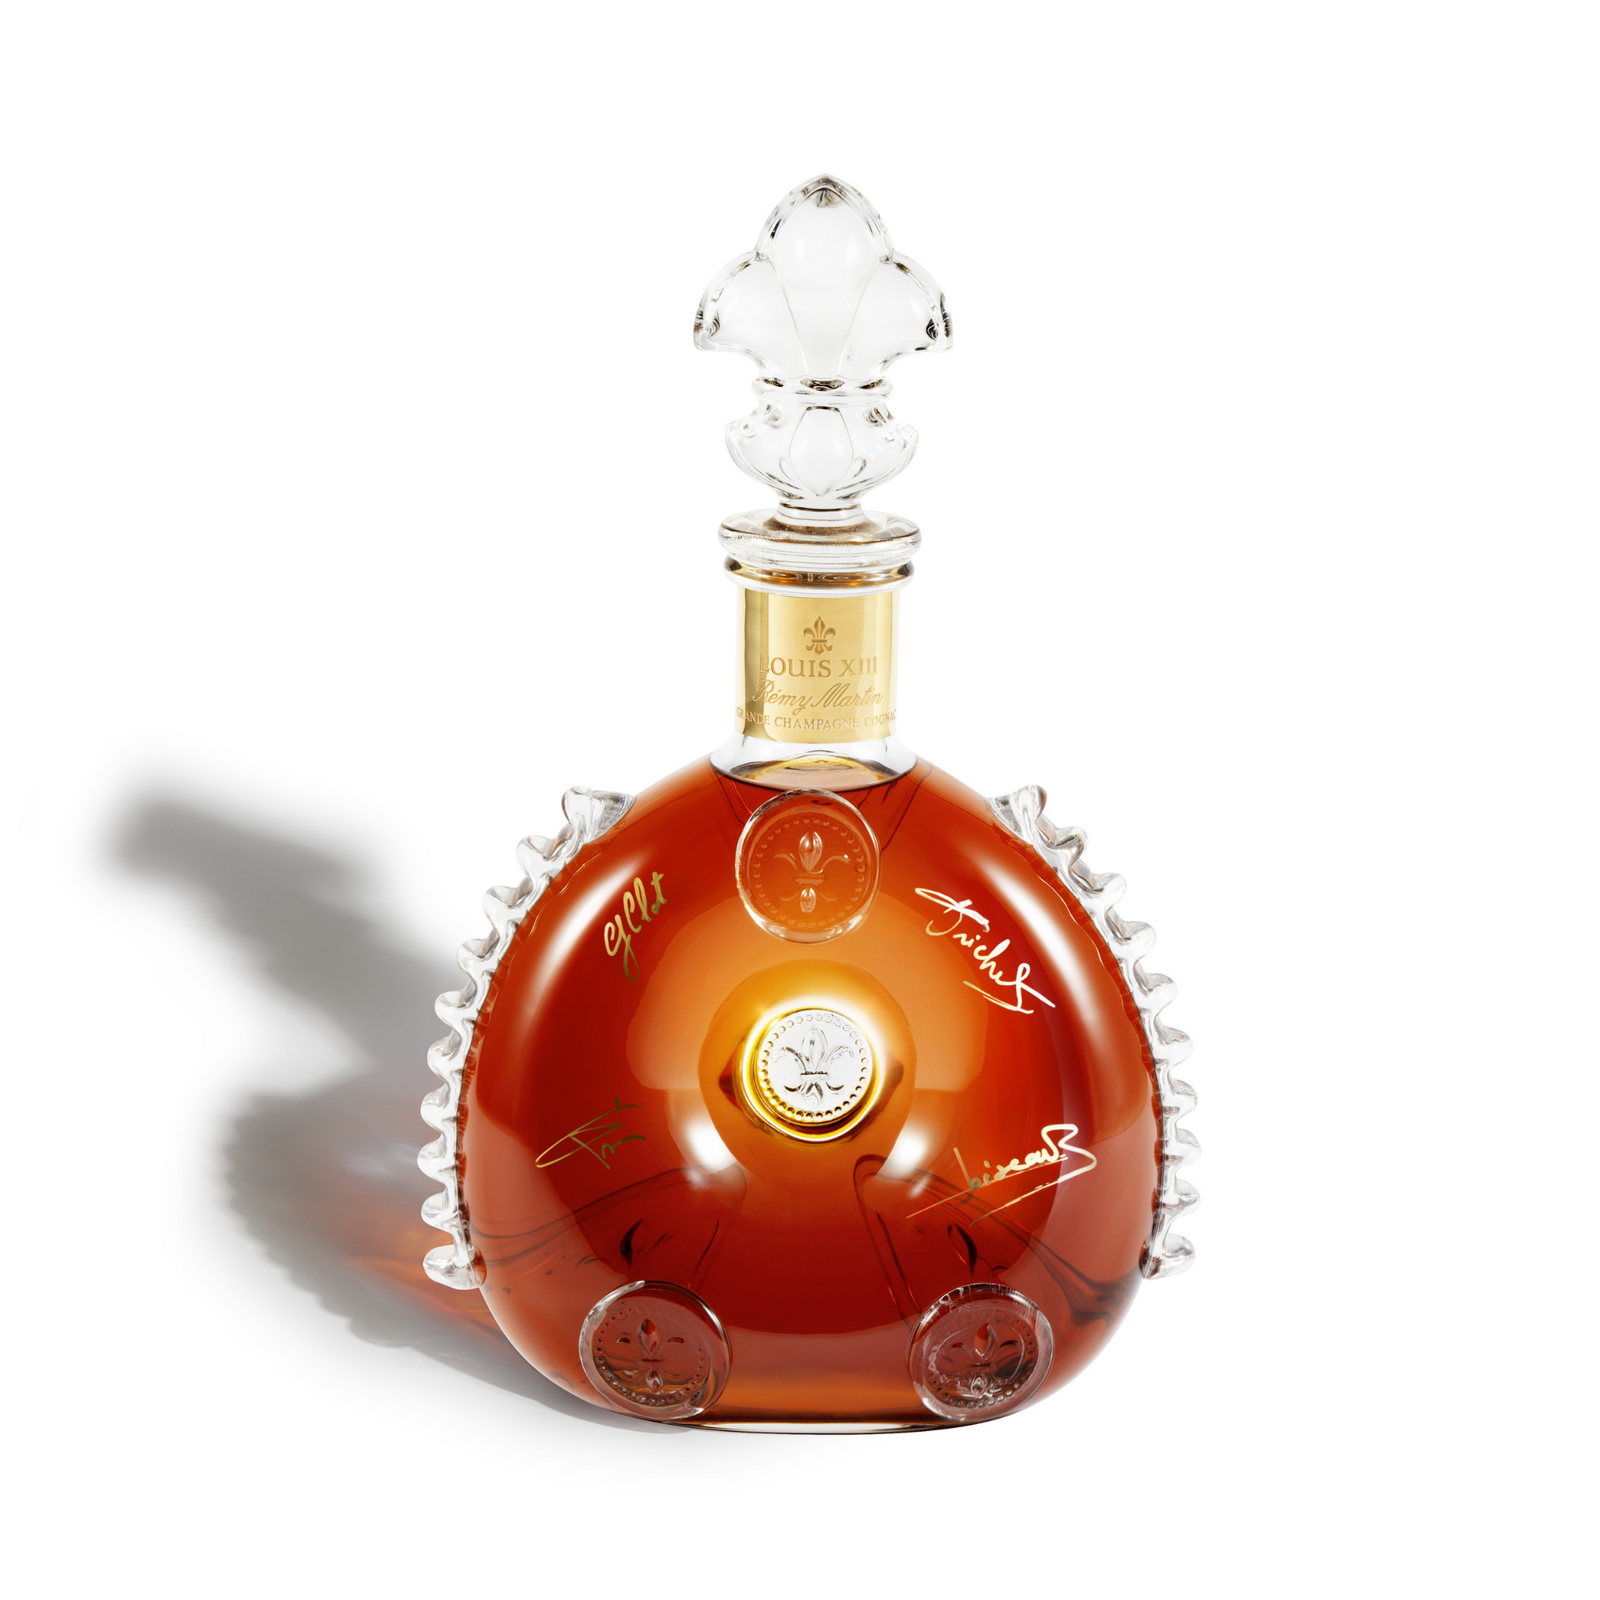 A packshot of LOUIS XIII Legacy decanter on a white background